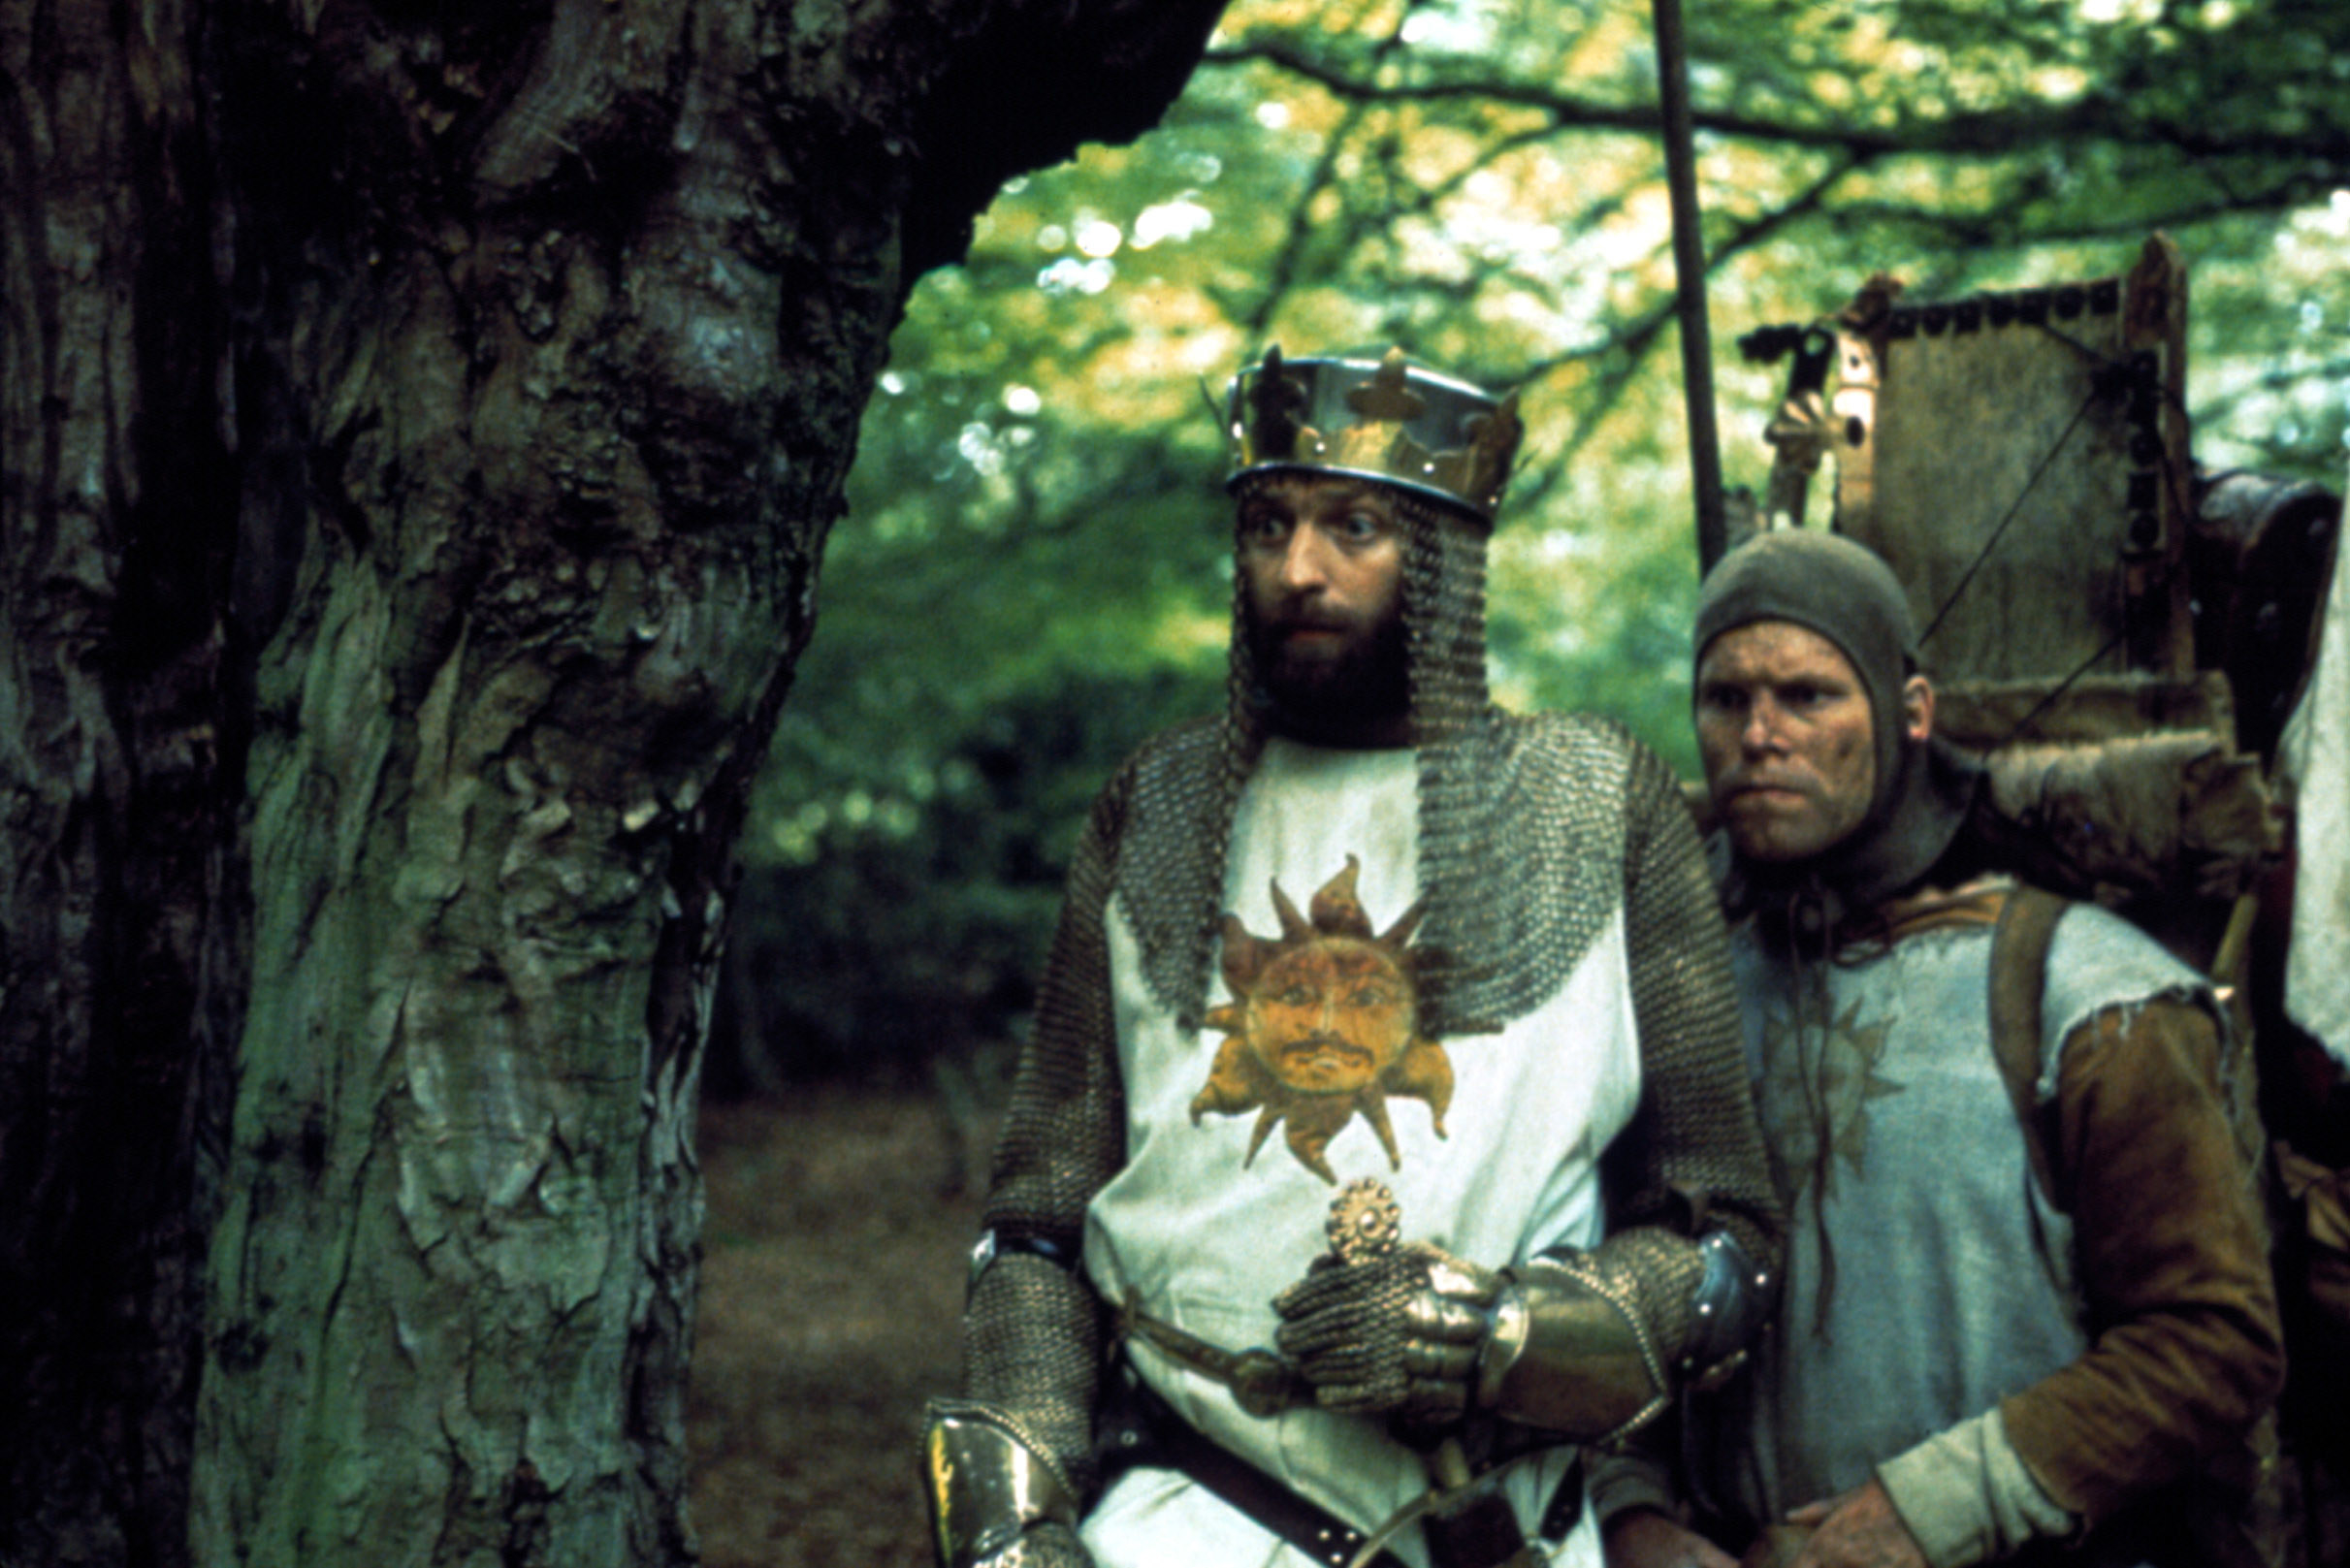 Two knights standing in the forest